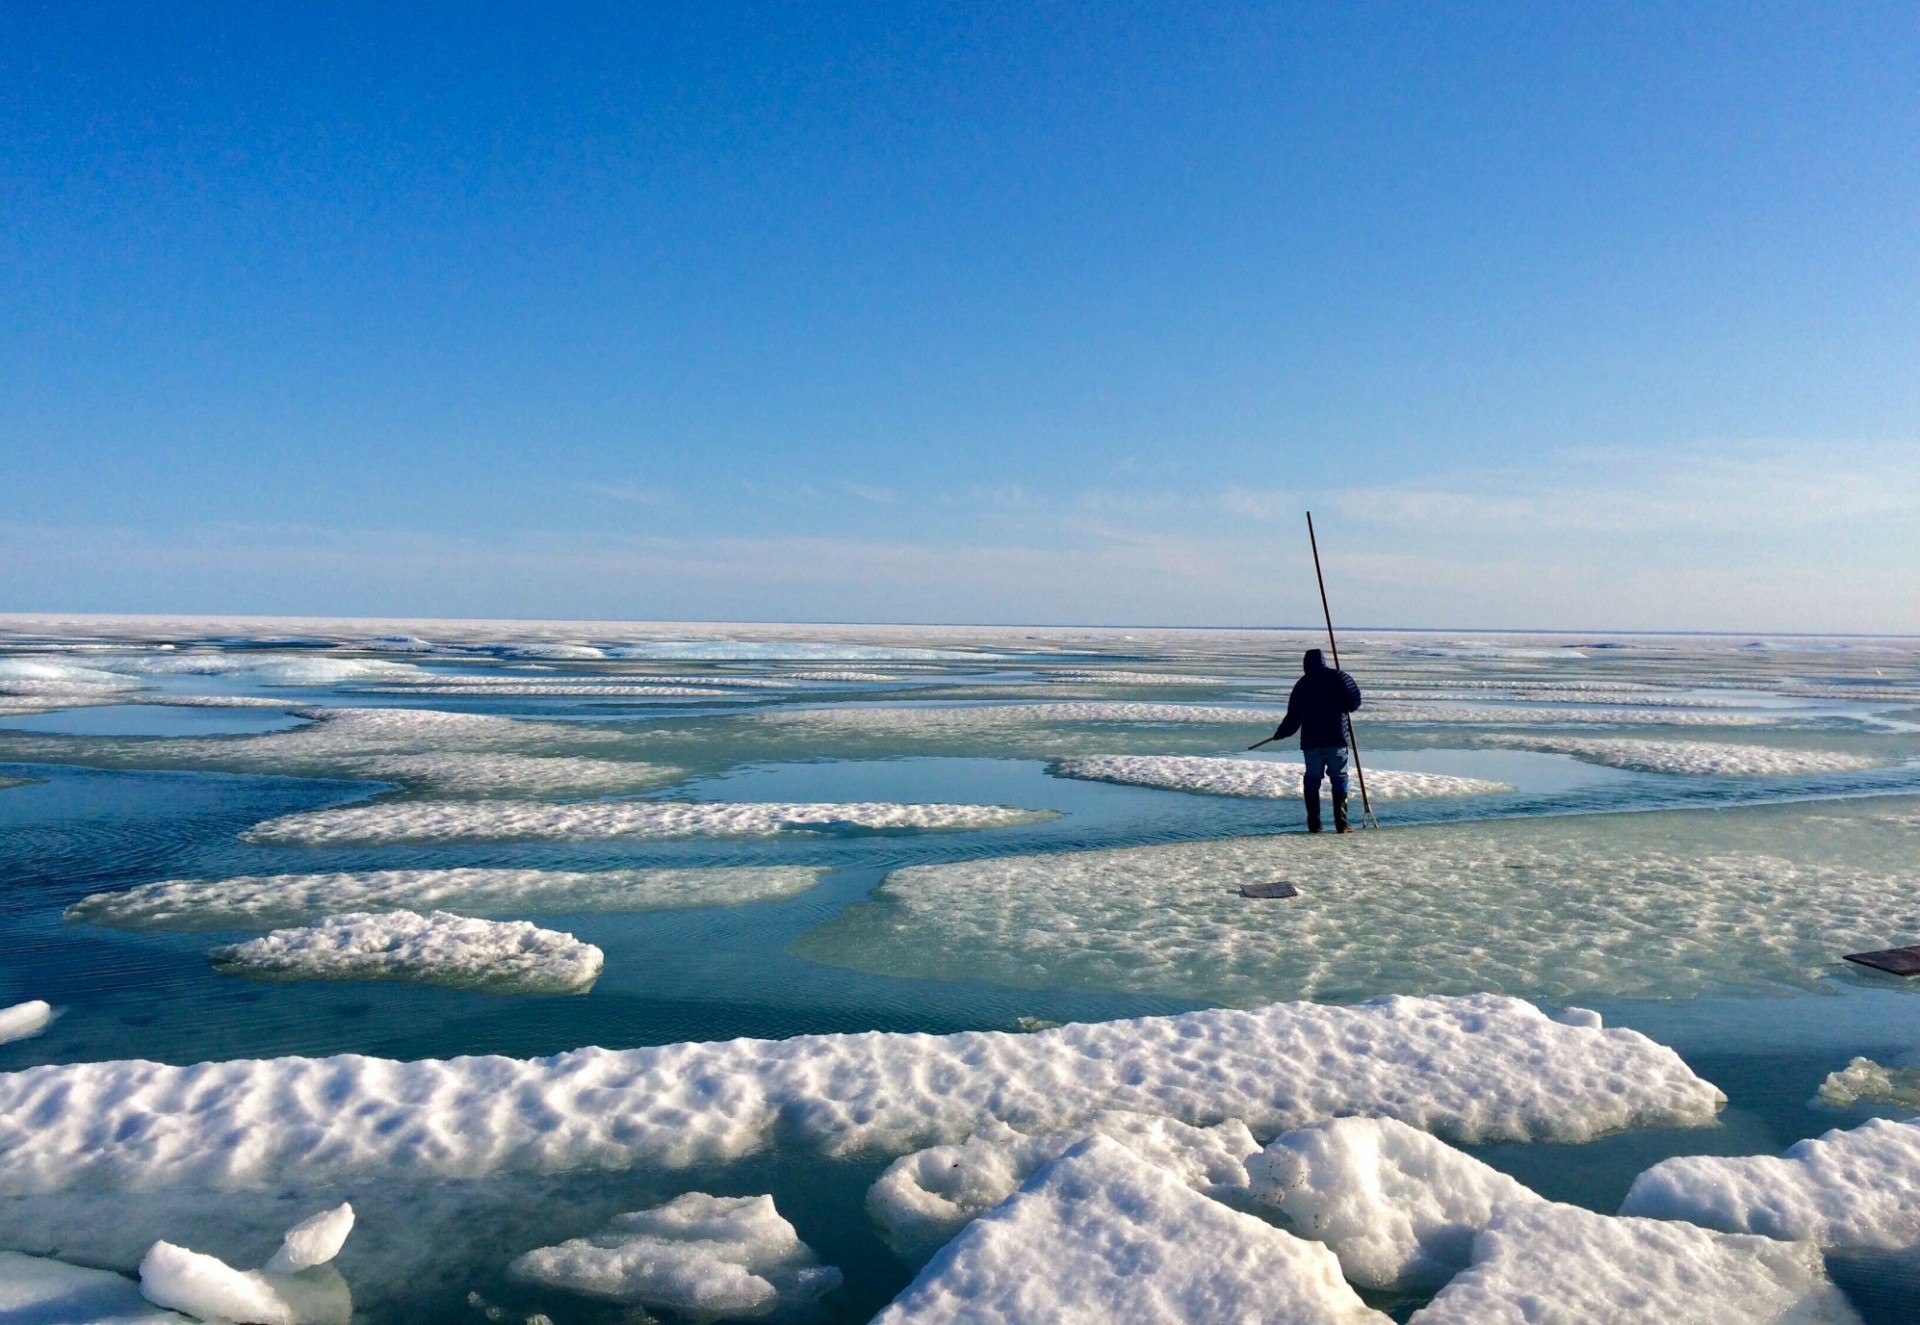 A person ice fishing in the North-West passage near Cambridge Bay, Nunavut